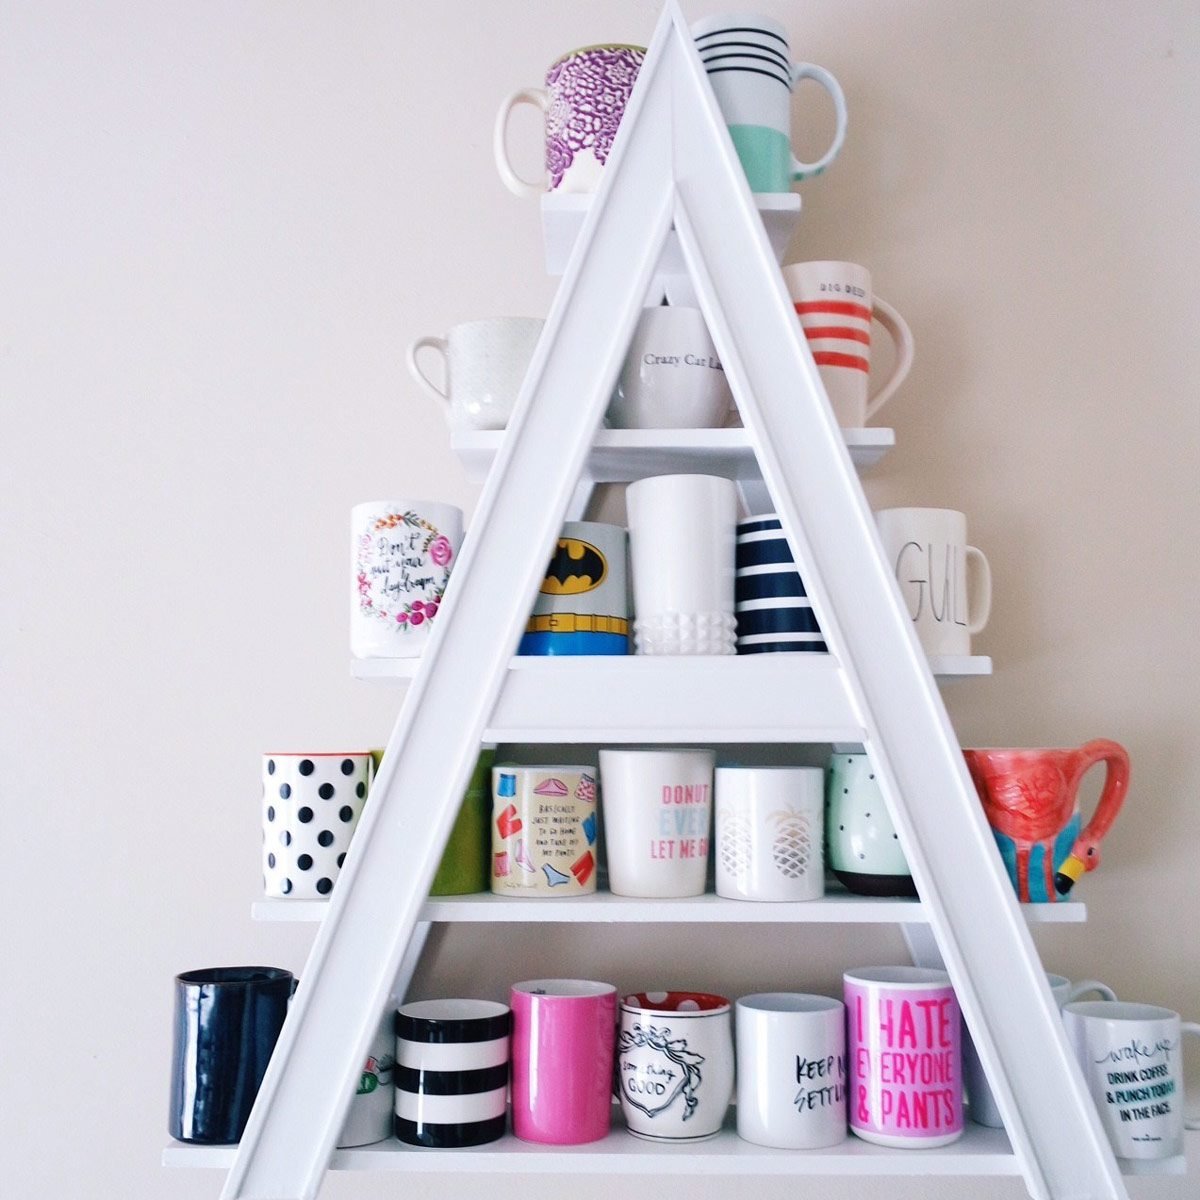 12 Best Mug Trees and Displays You Can DIY